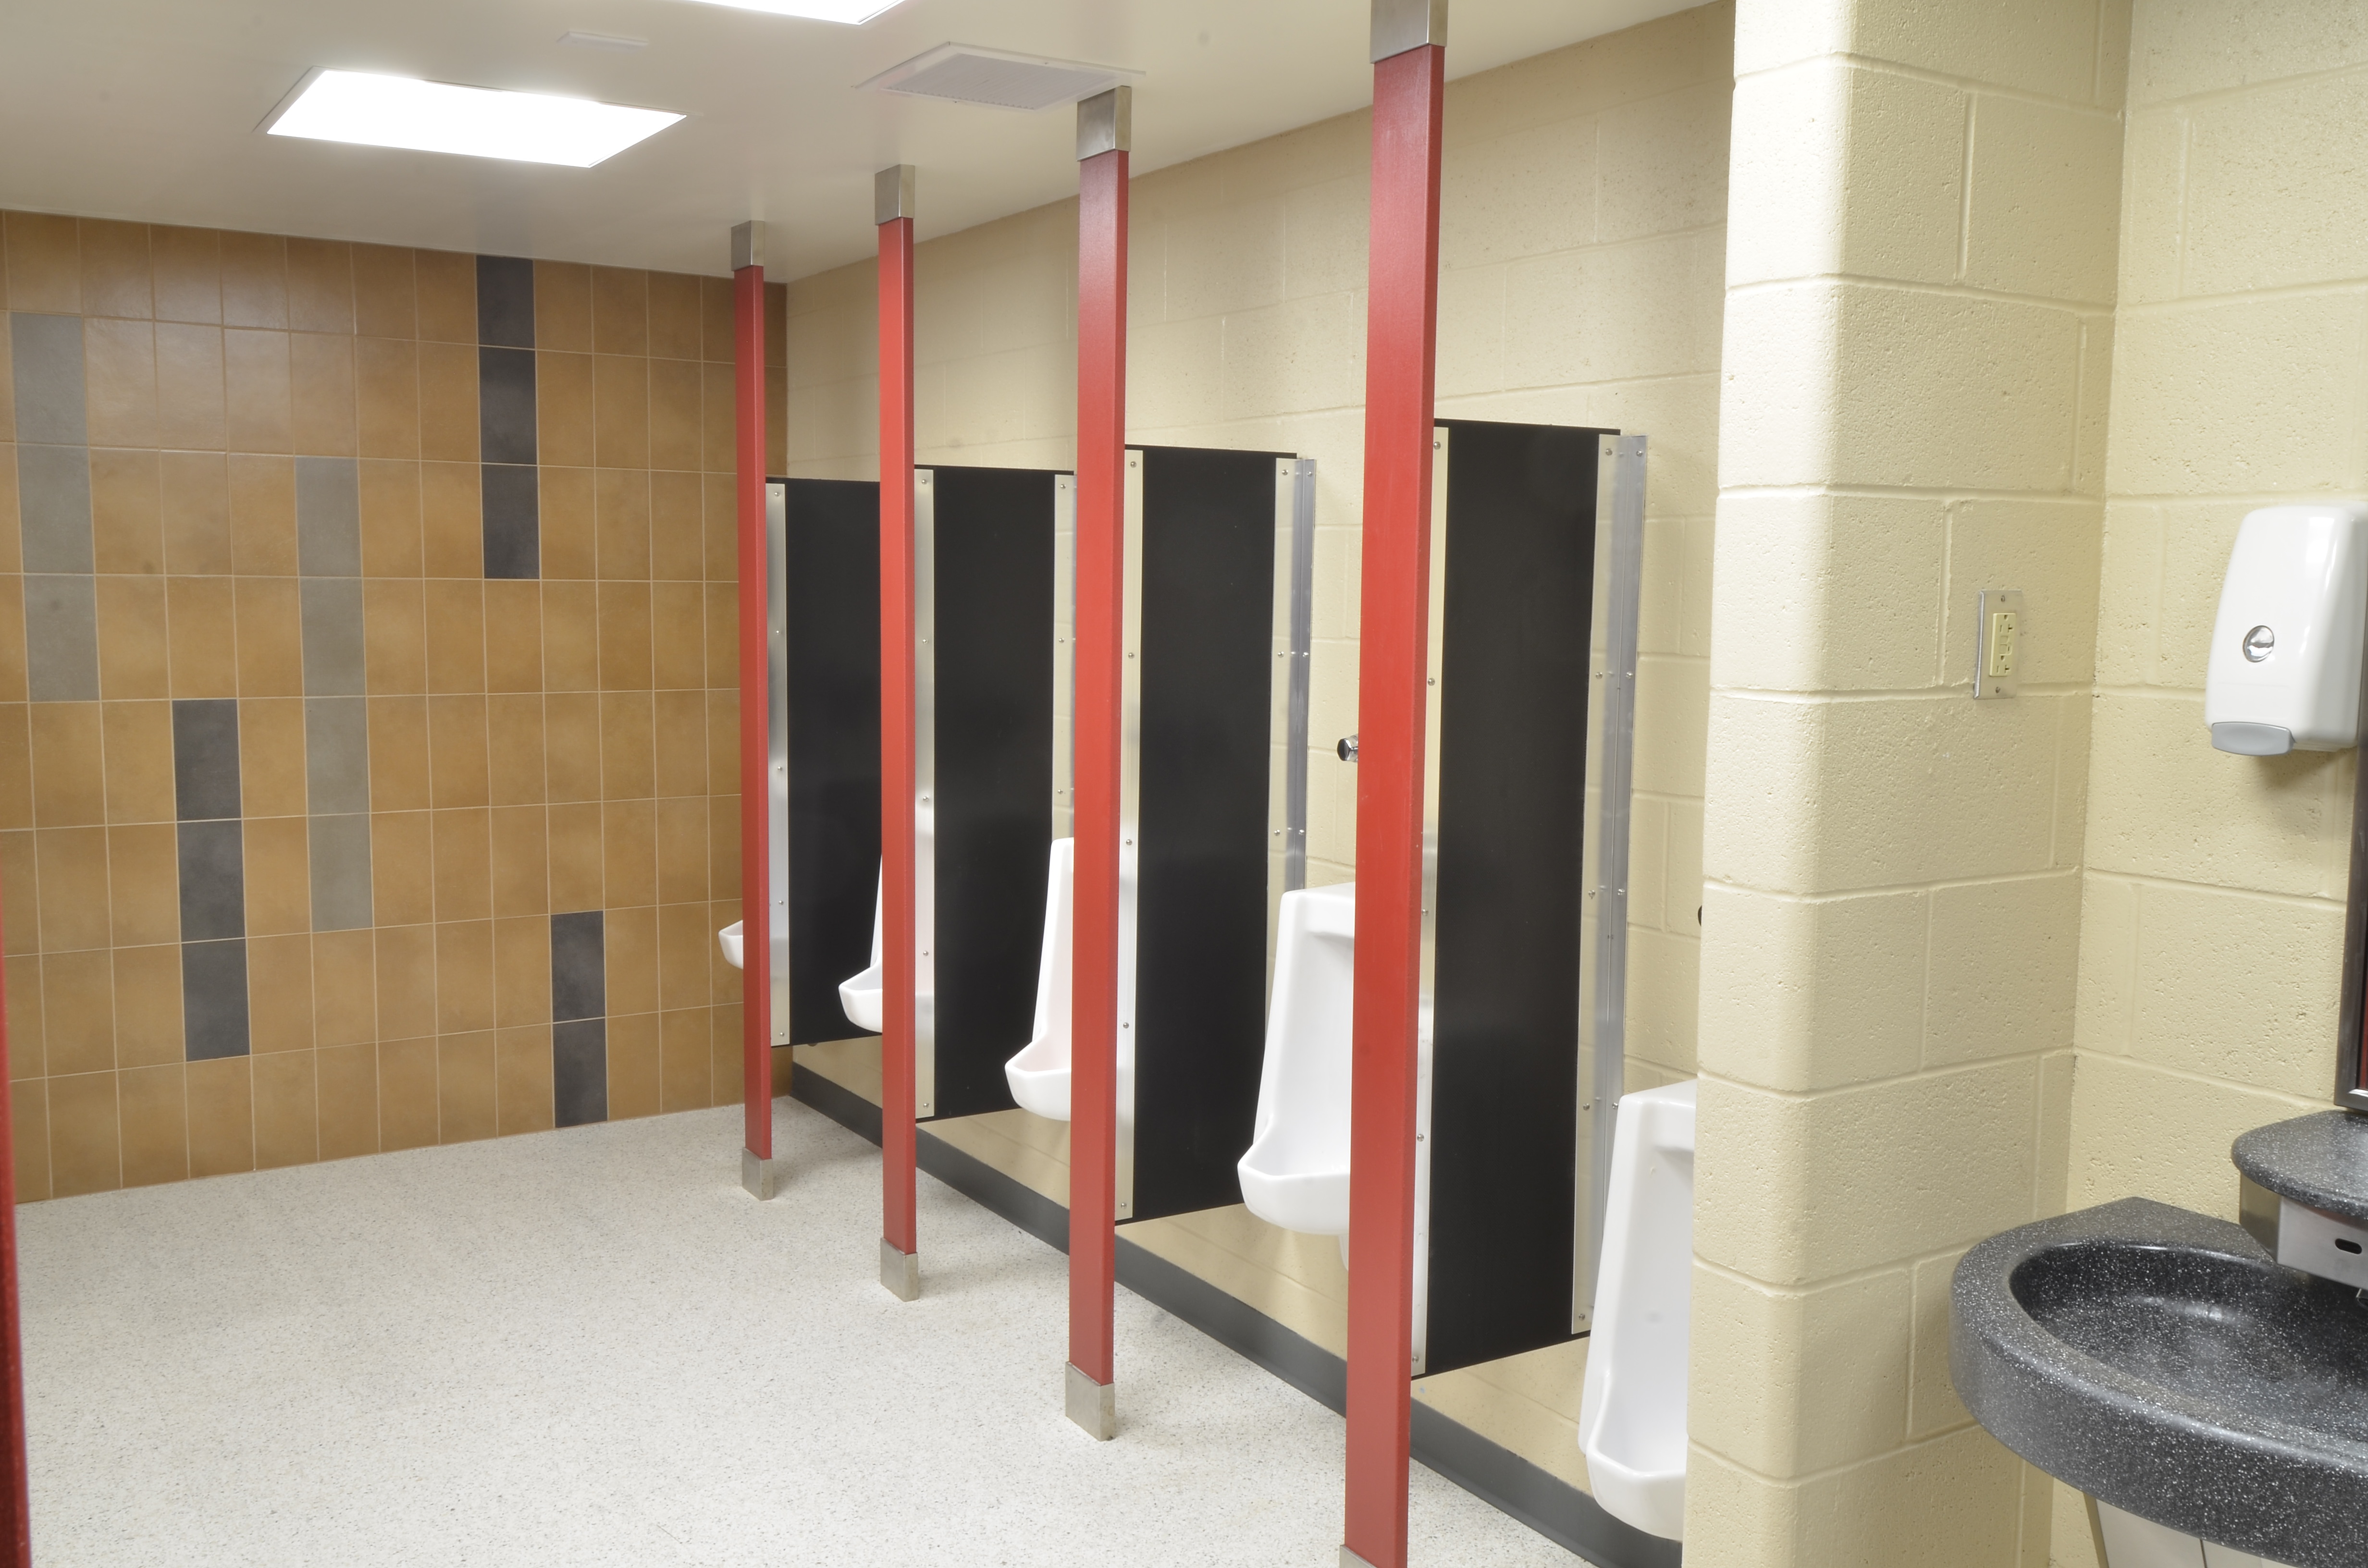 Peoria designers achieved a two-tone modernized restroom style